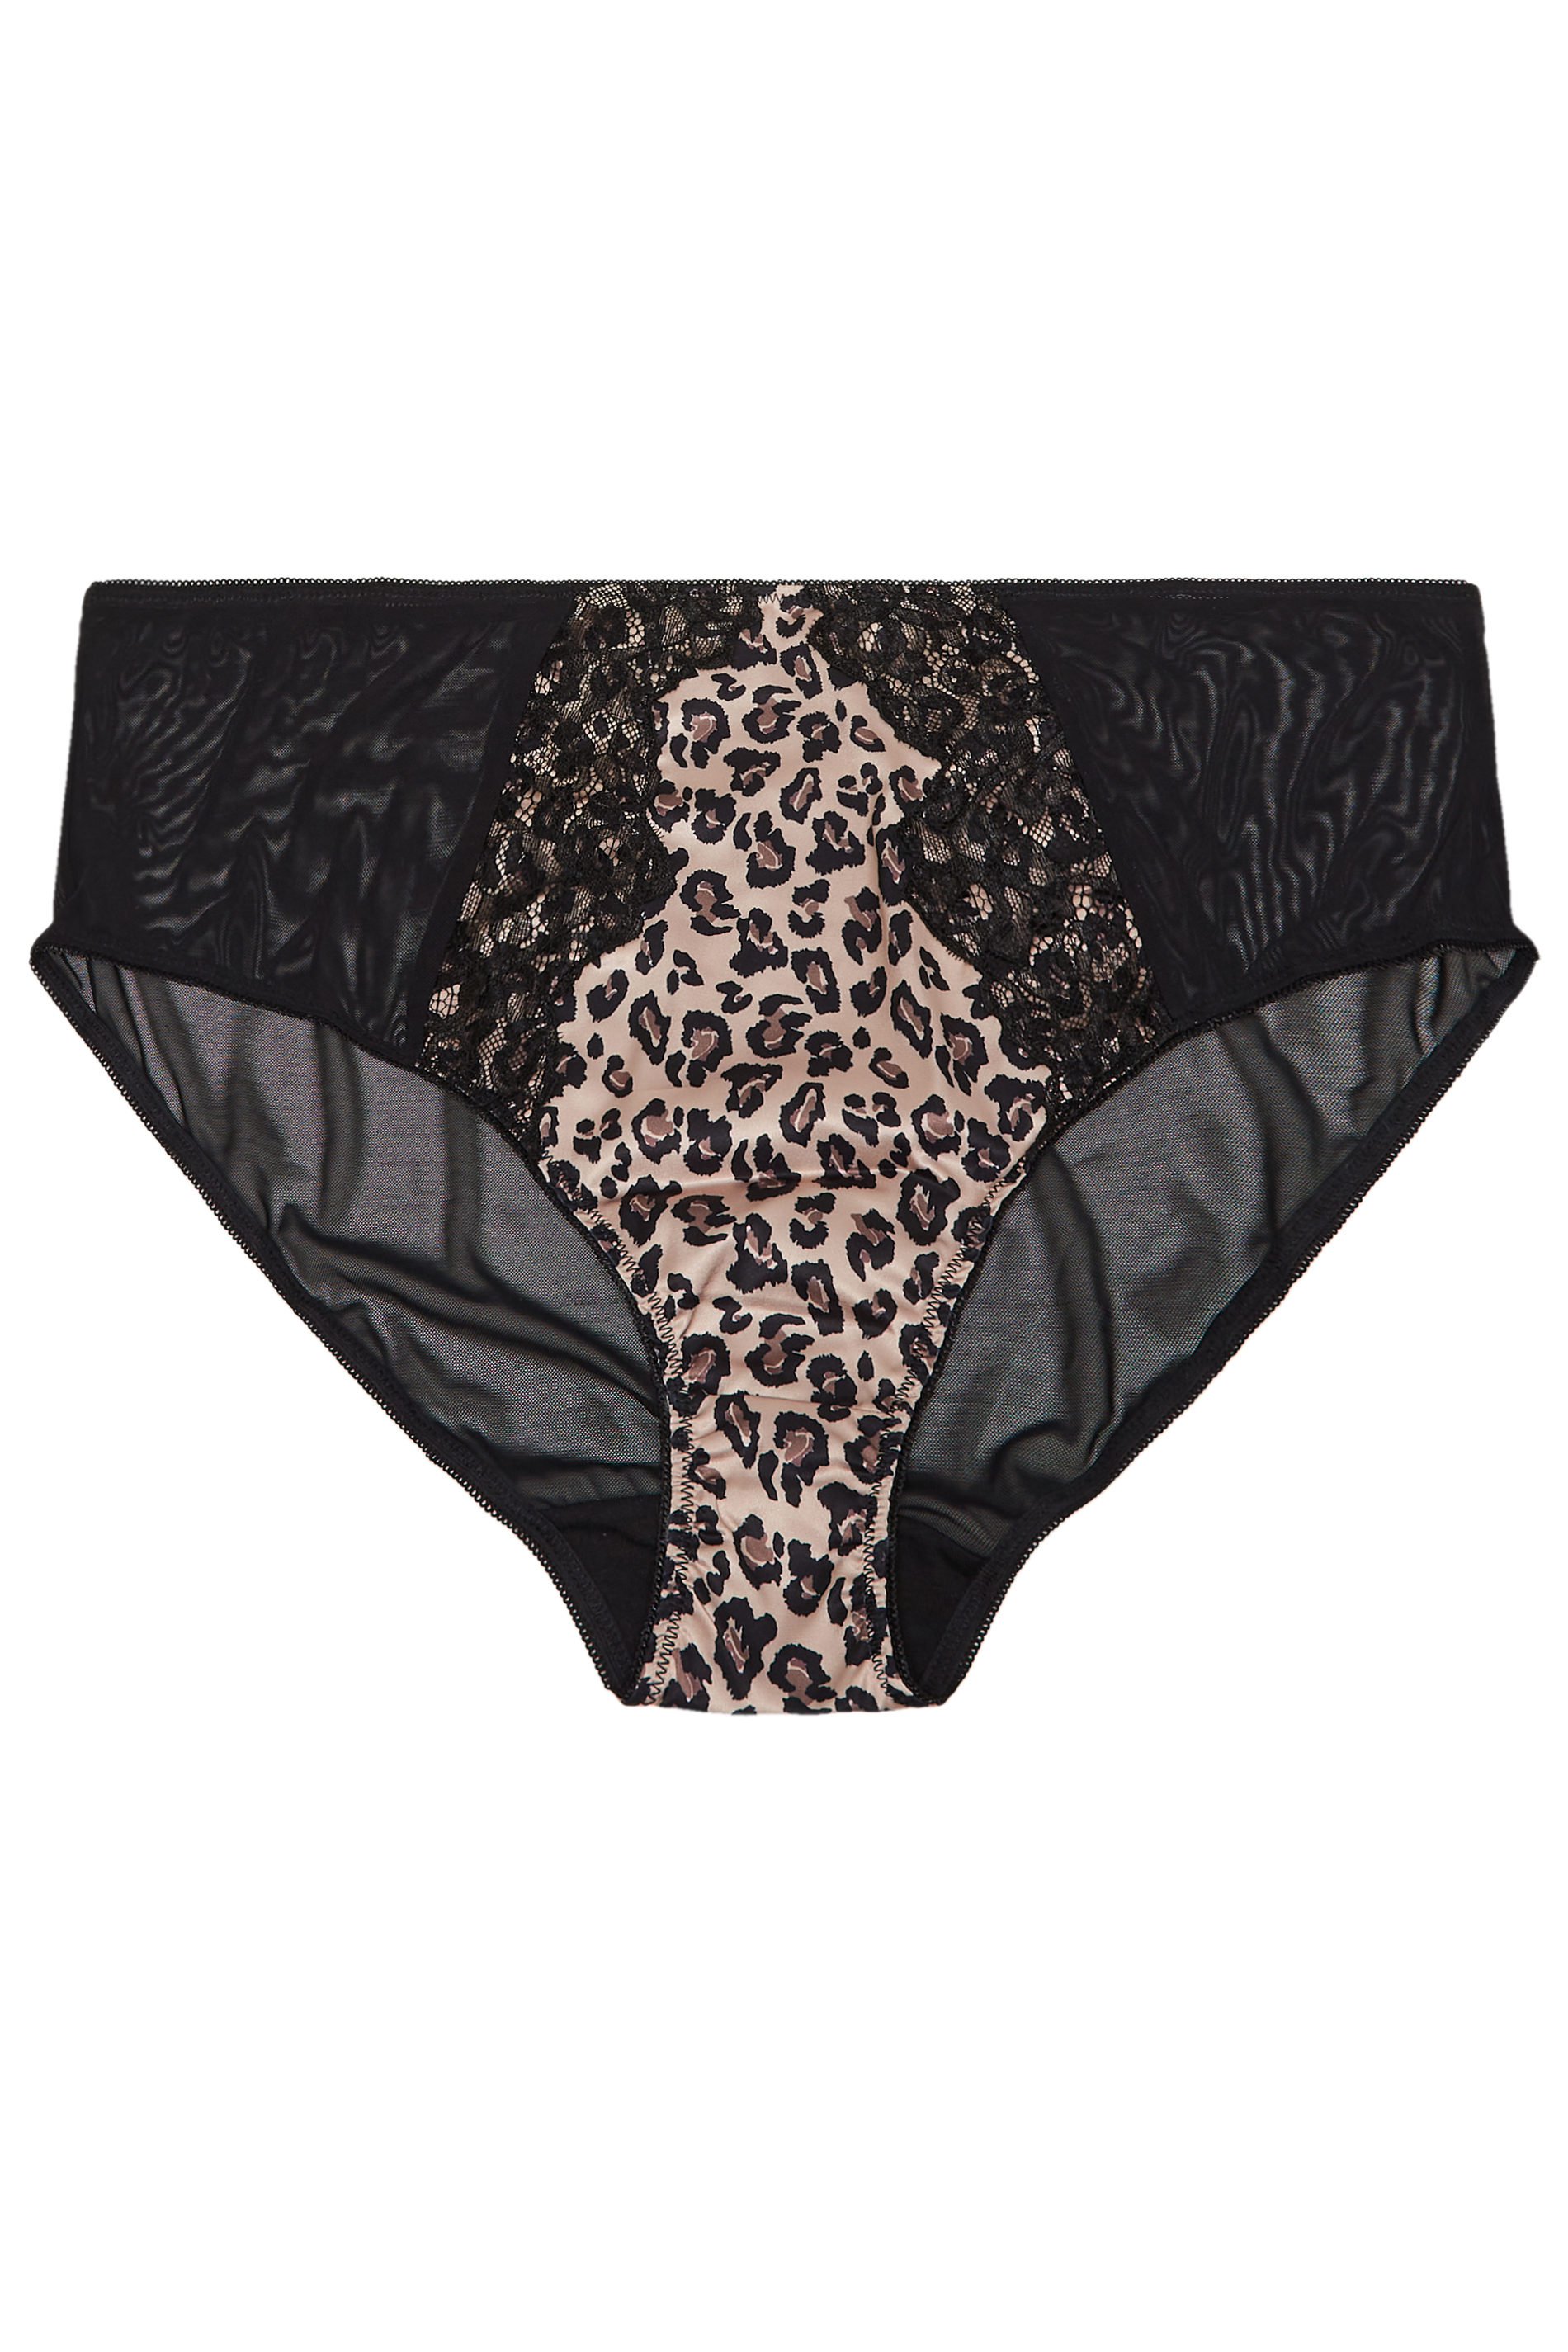 1pc Women's Leopard Print Underwear With Good Luck Letters Print